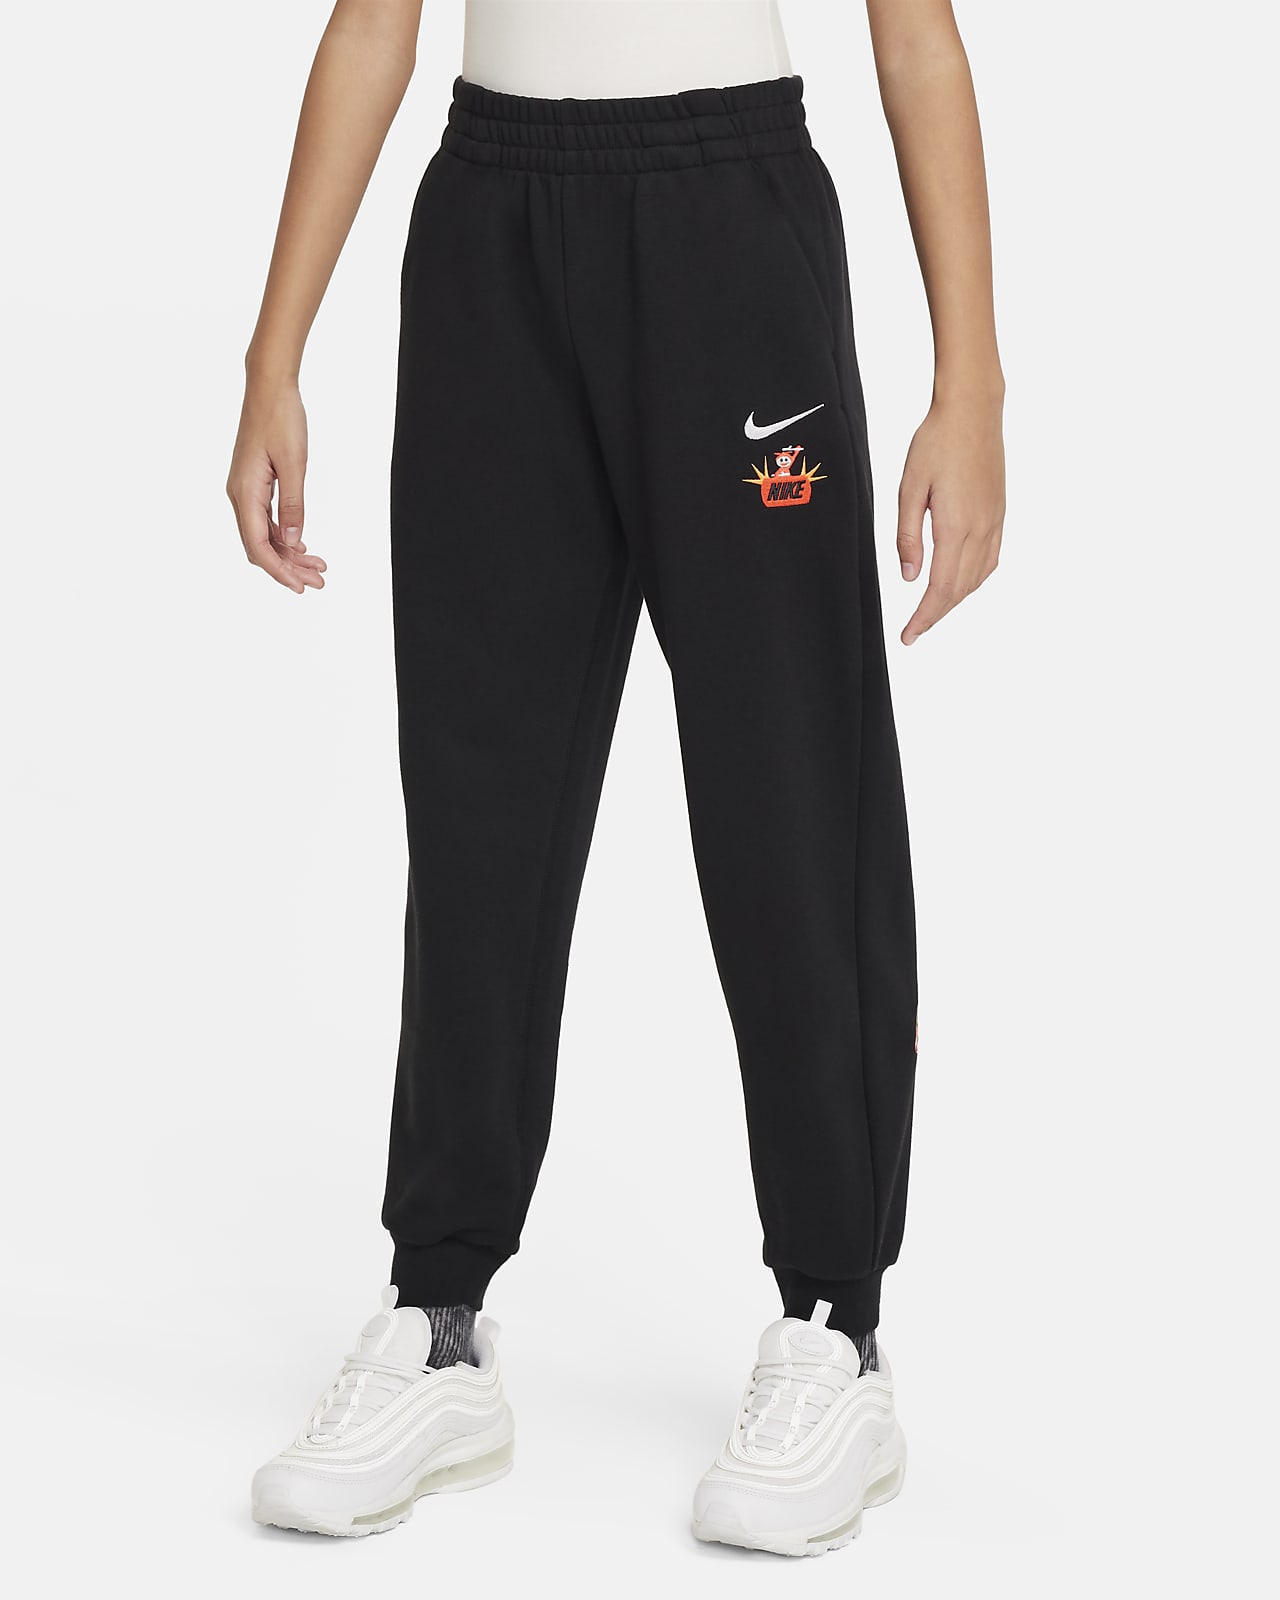 Nike Collection fleece loose fit cuffed joggers in white